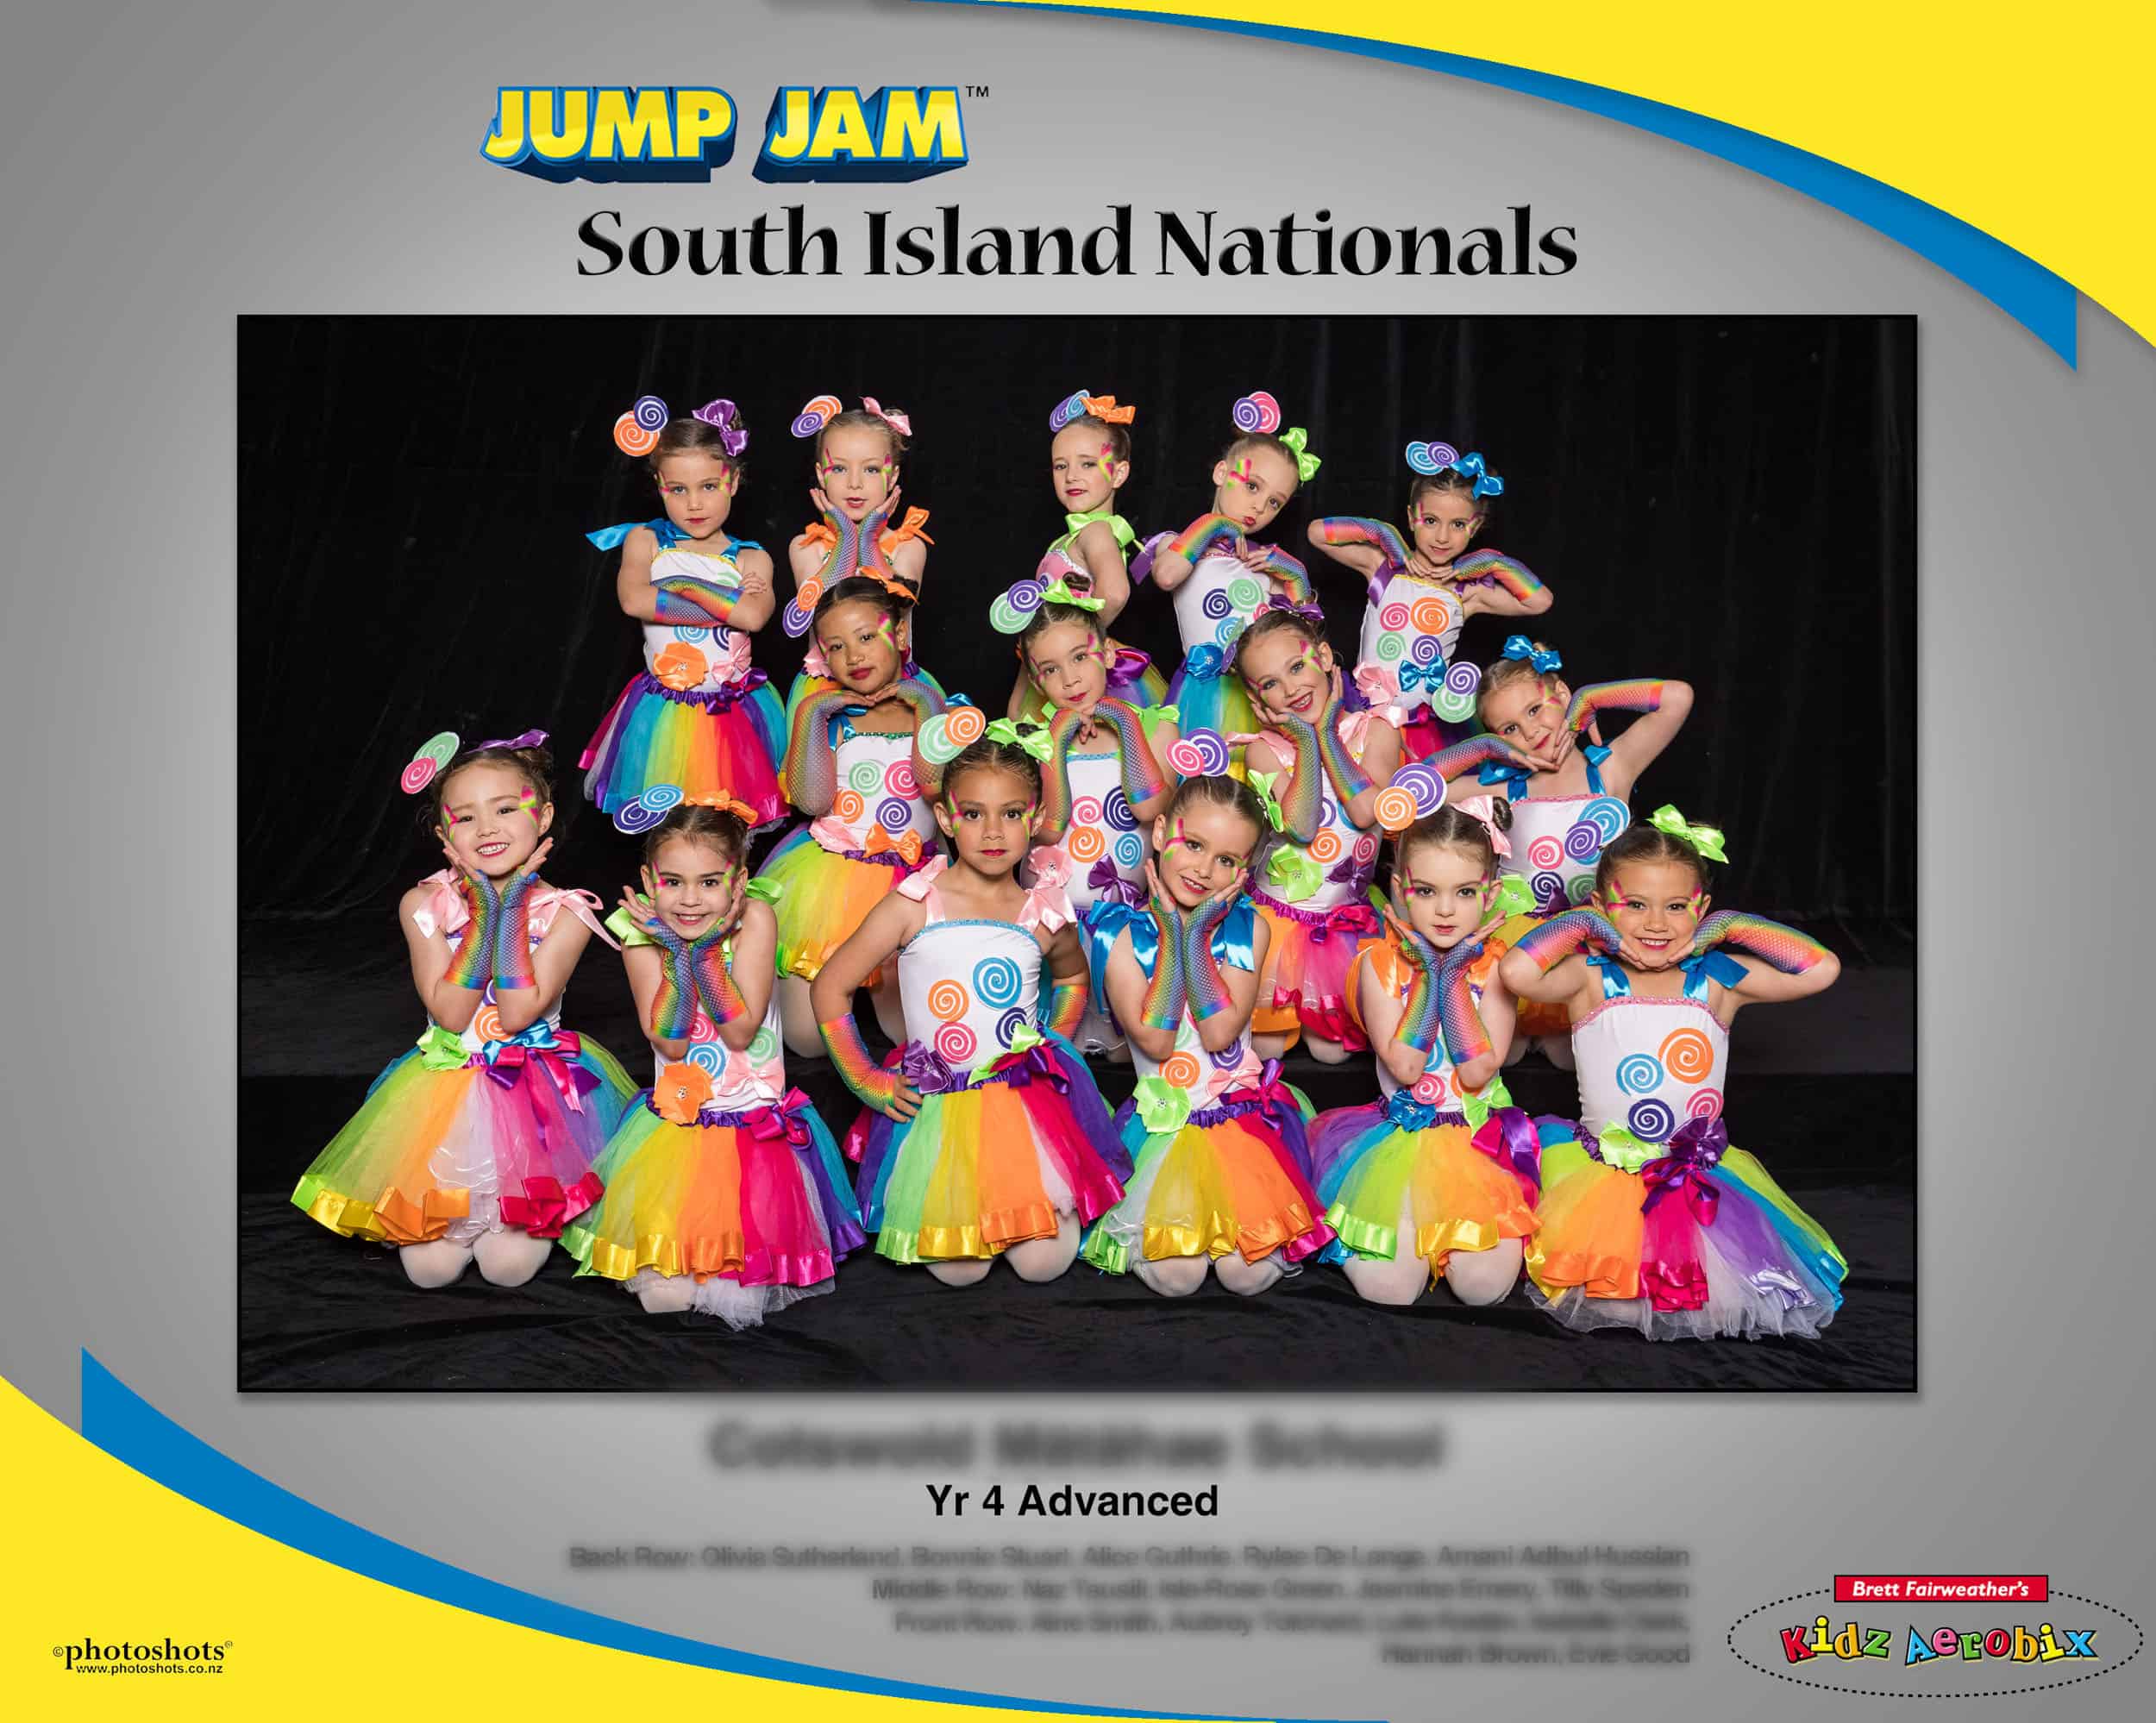 Primary school girls dressed for their Jump Jam performance pose in character for their photo before national competition.